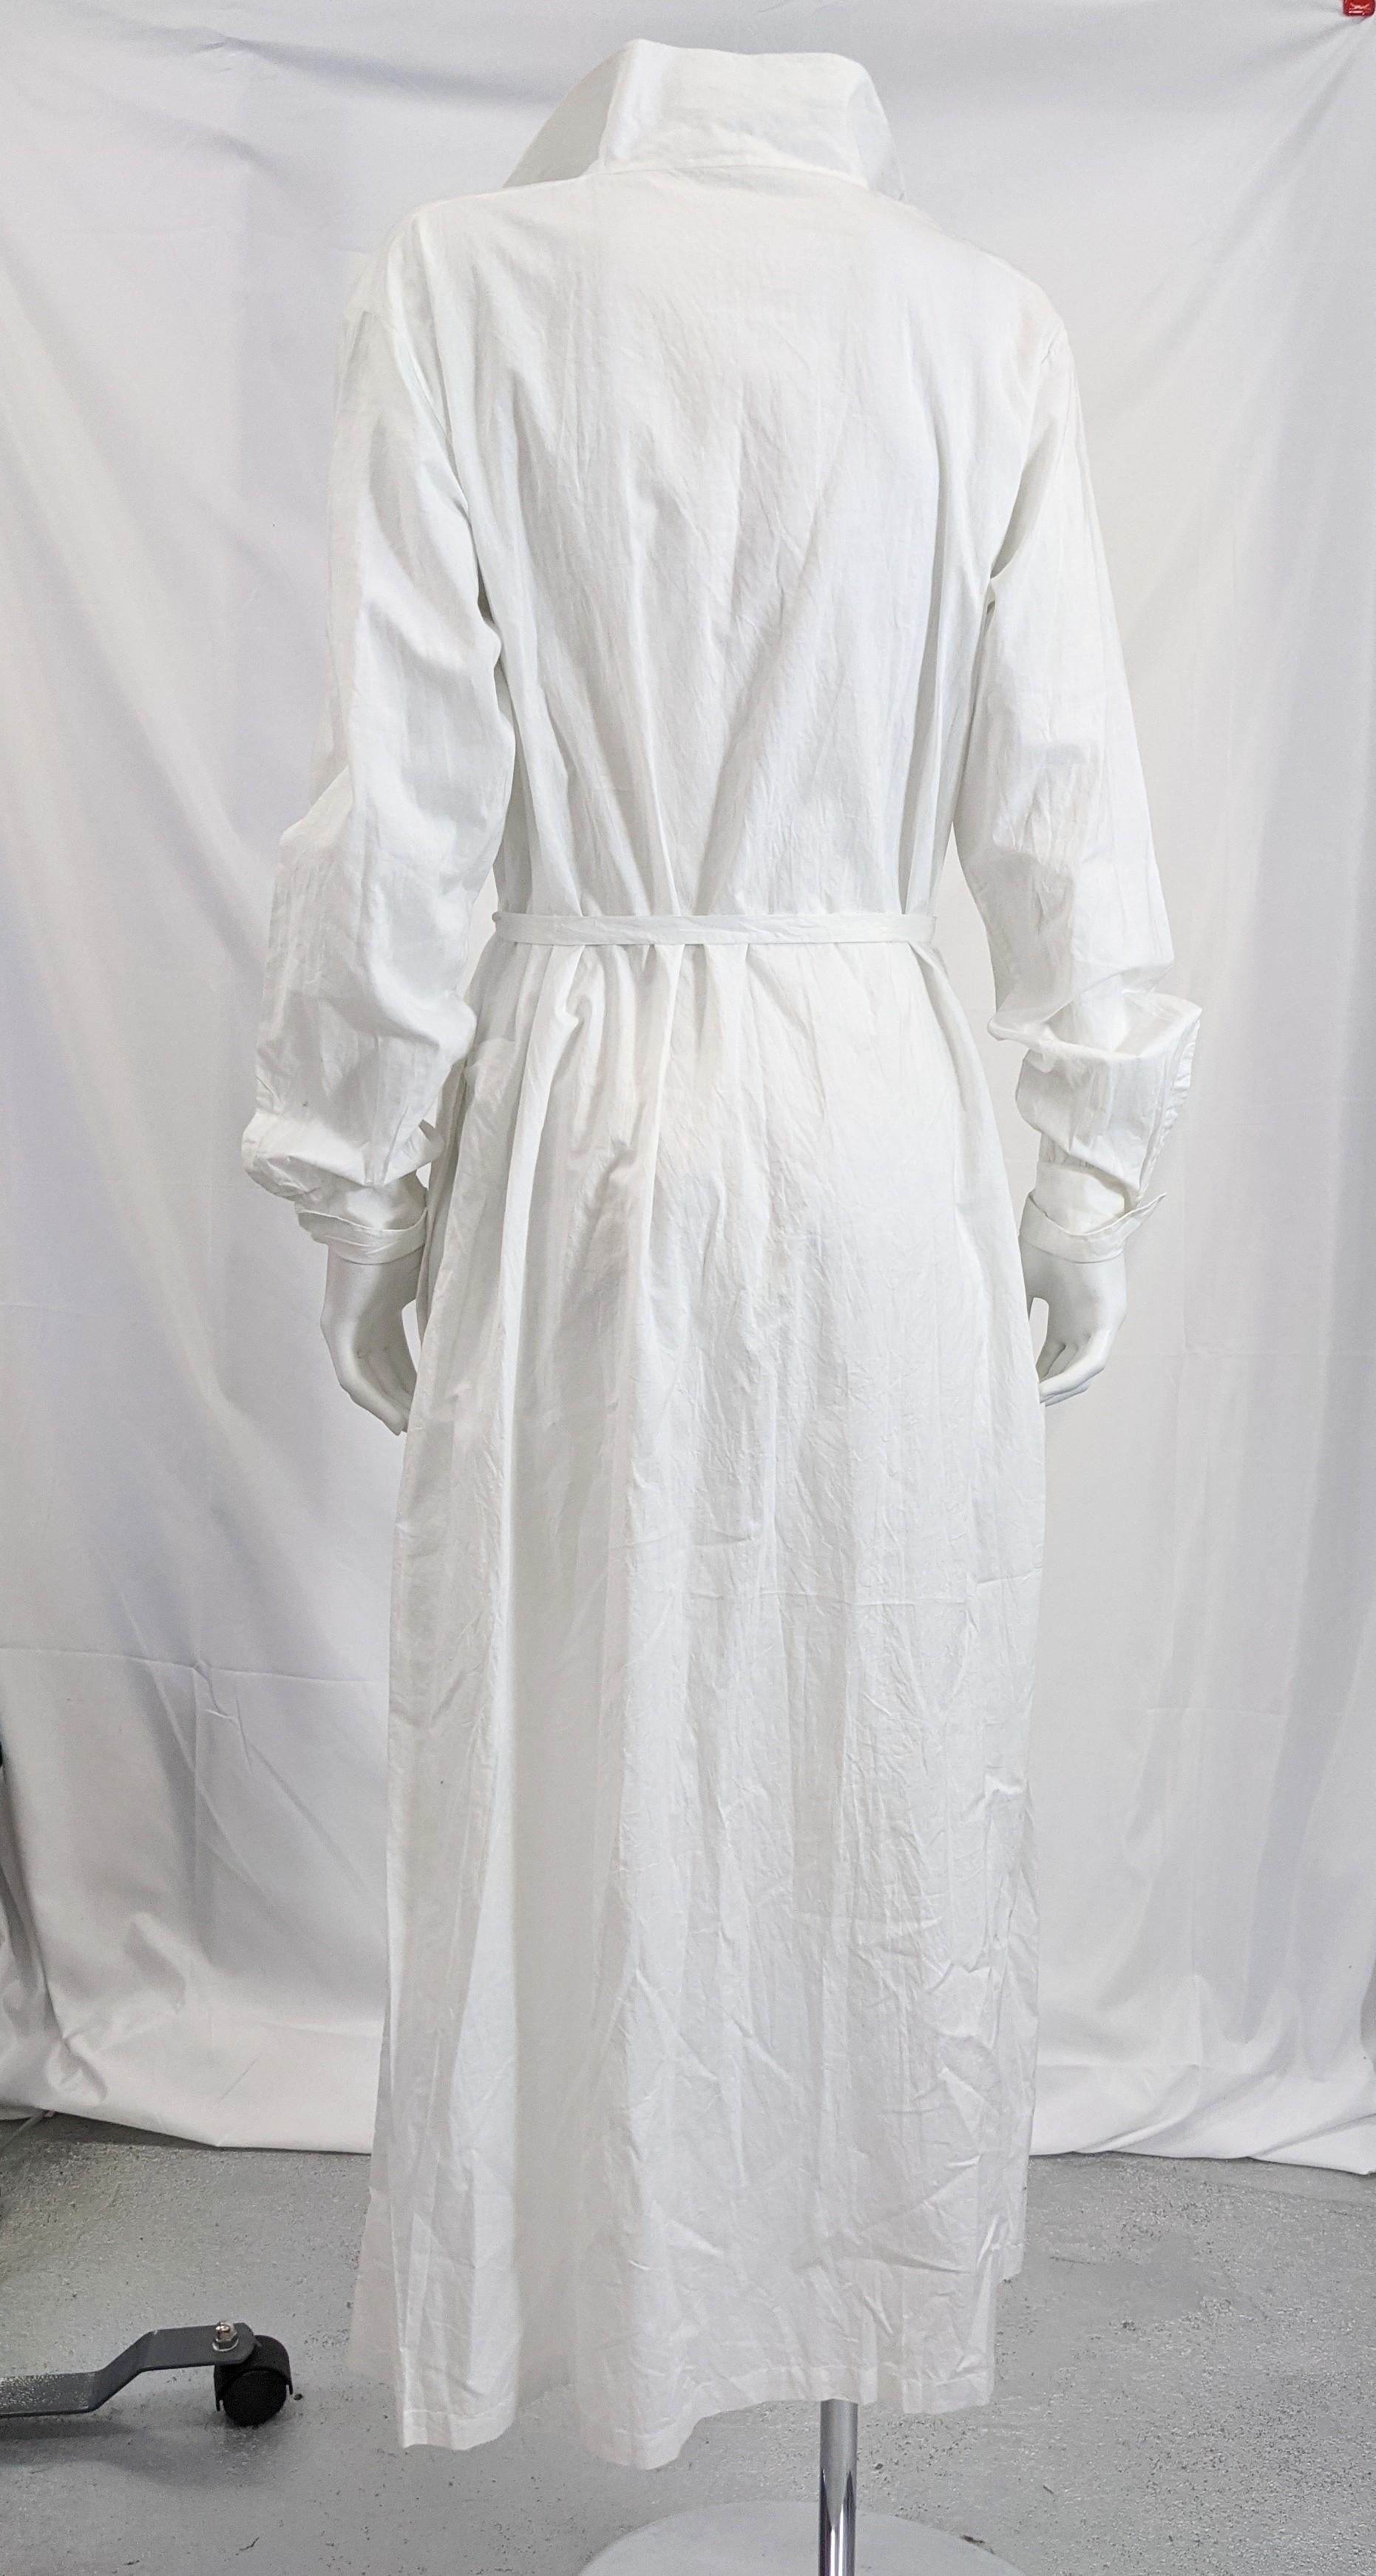 French Cotton Batiste Dress In Excellent Condition For Sale In New York, NY